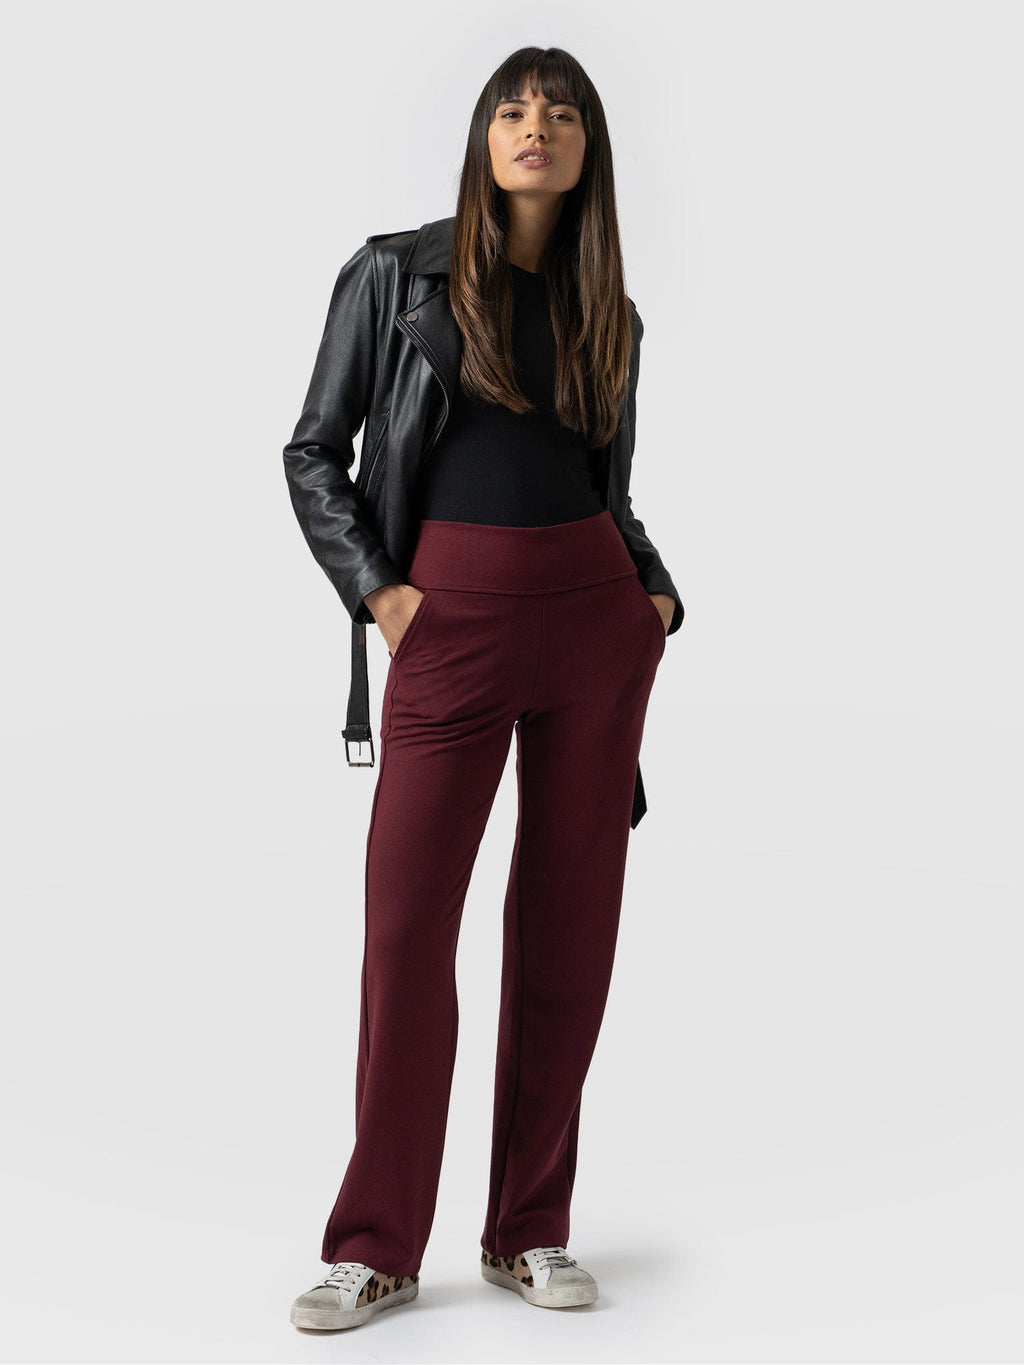 Burgundy Pants Summer Outfits For Women (48 ideas & outfits